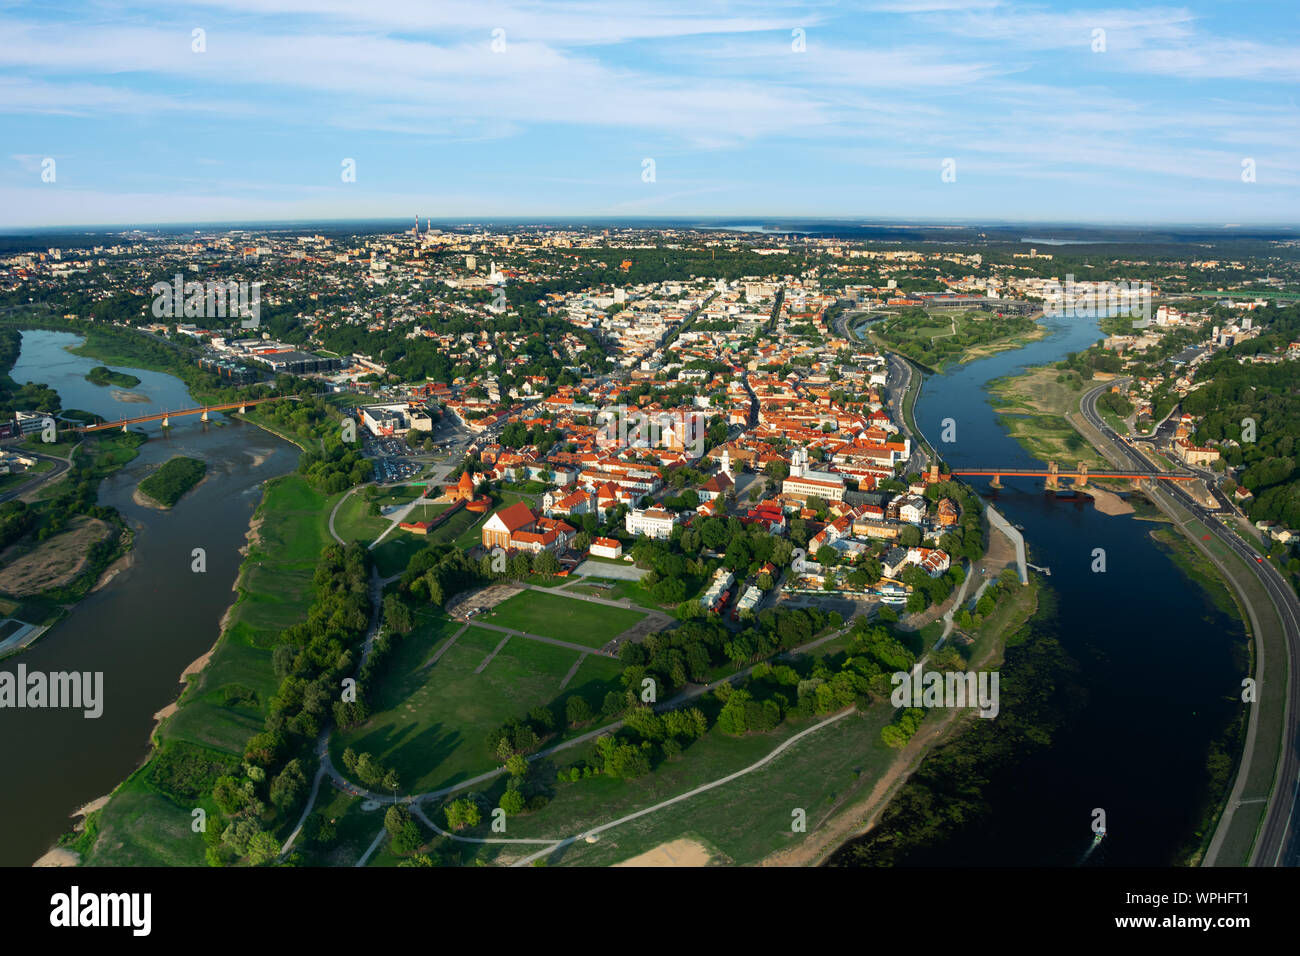 Aerial view of Kaunas city, captured during hot air balloon flight in Lithuania. Stock Photo